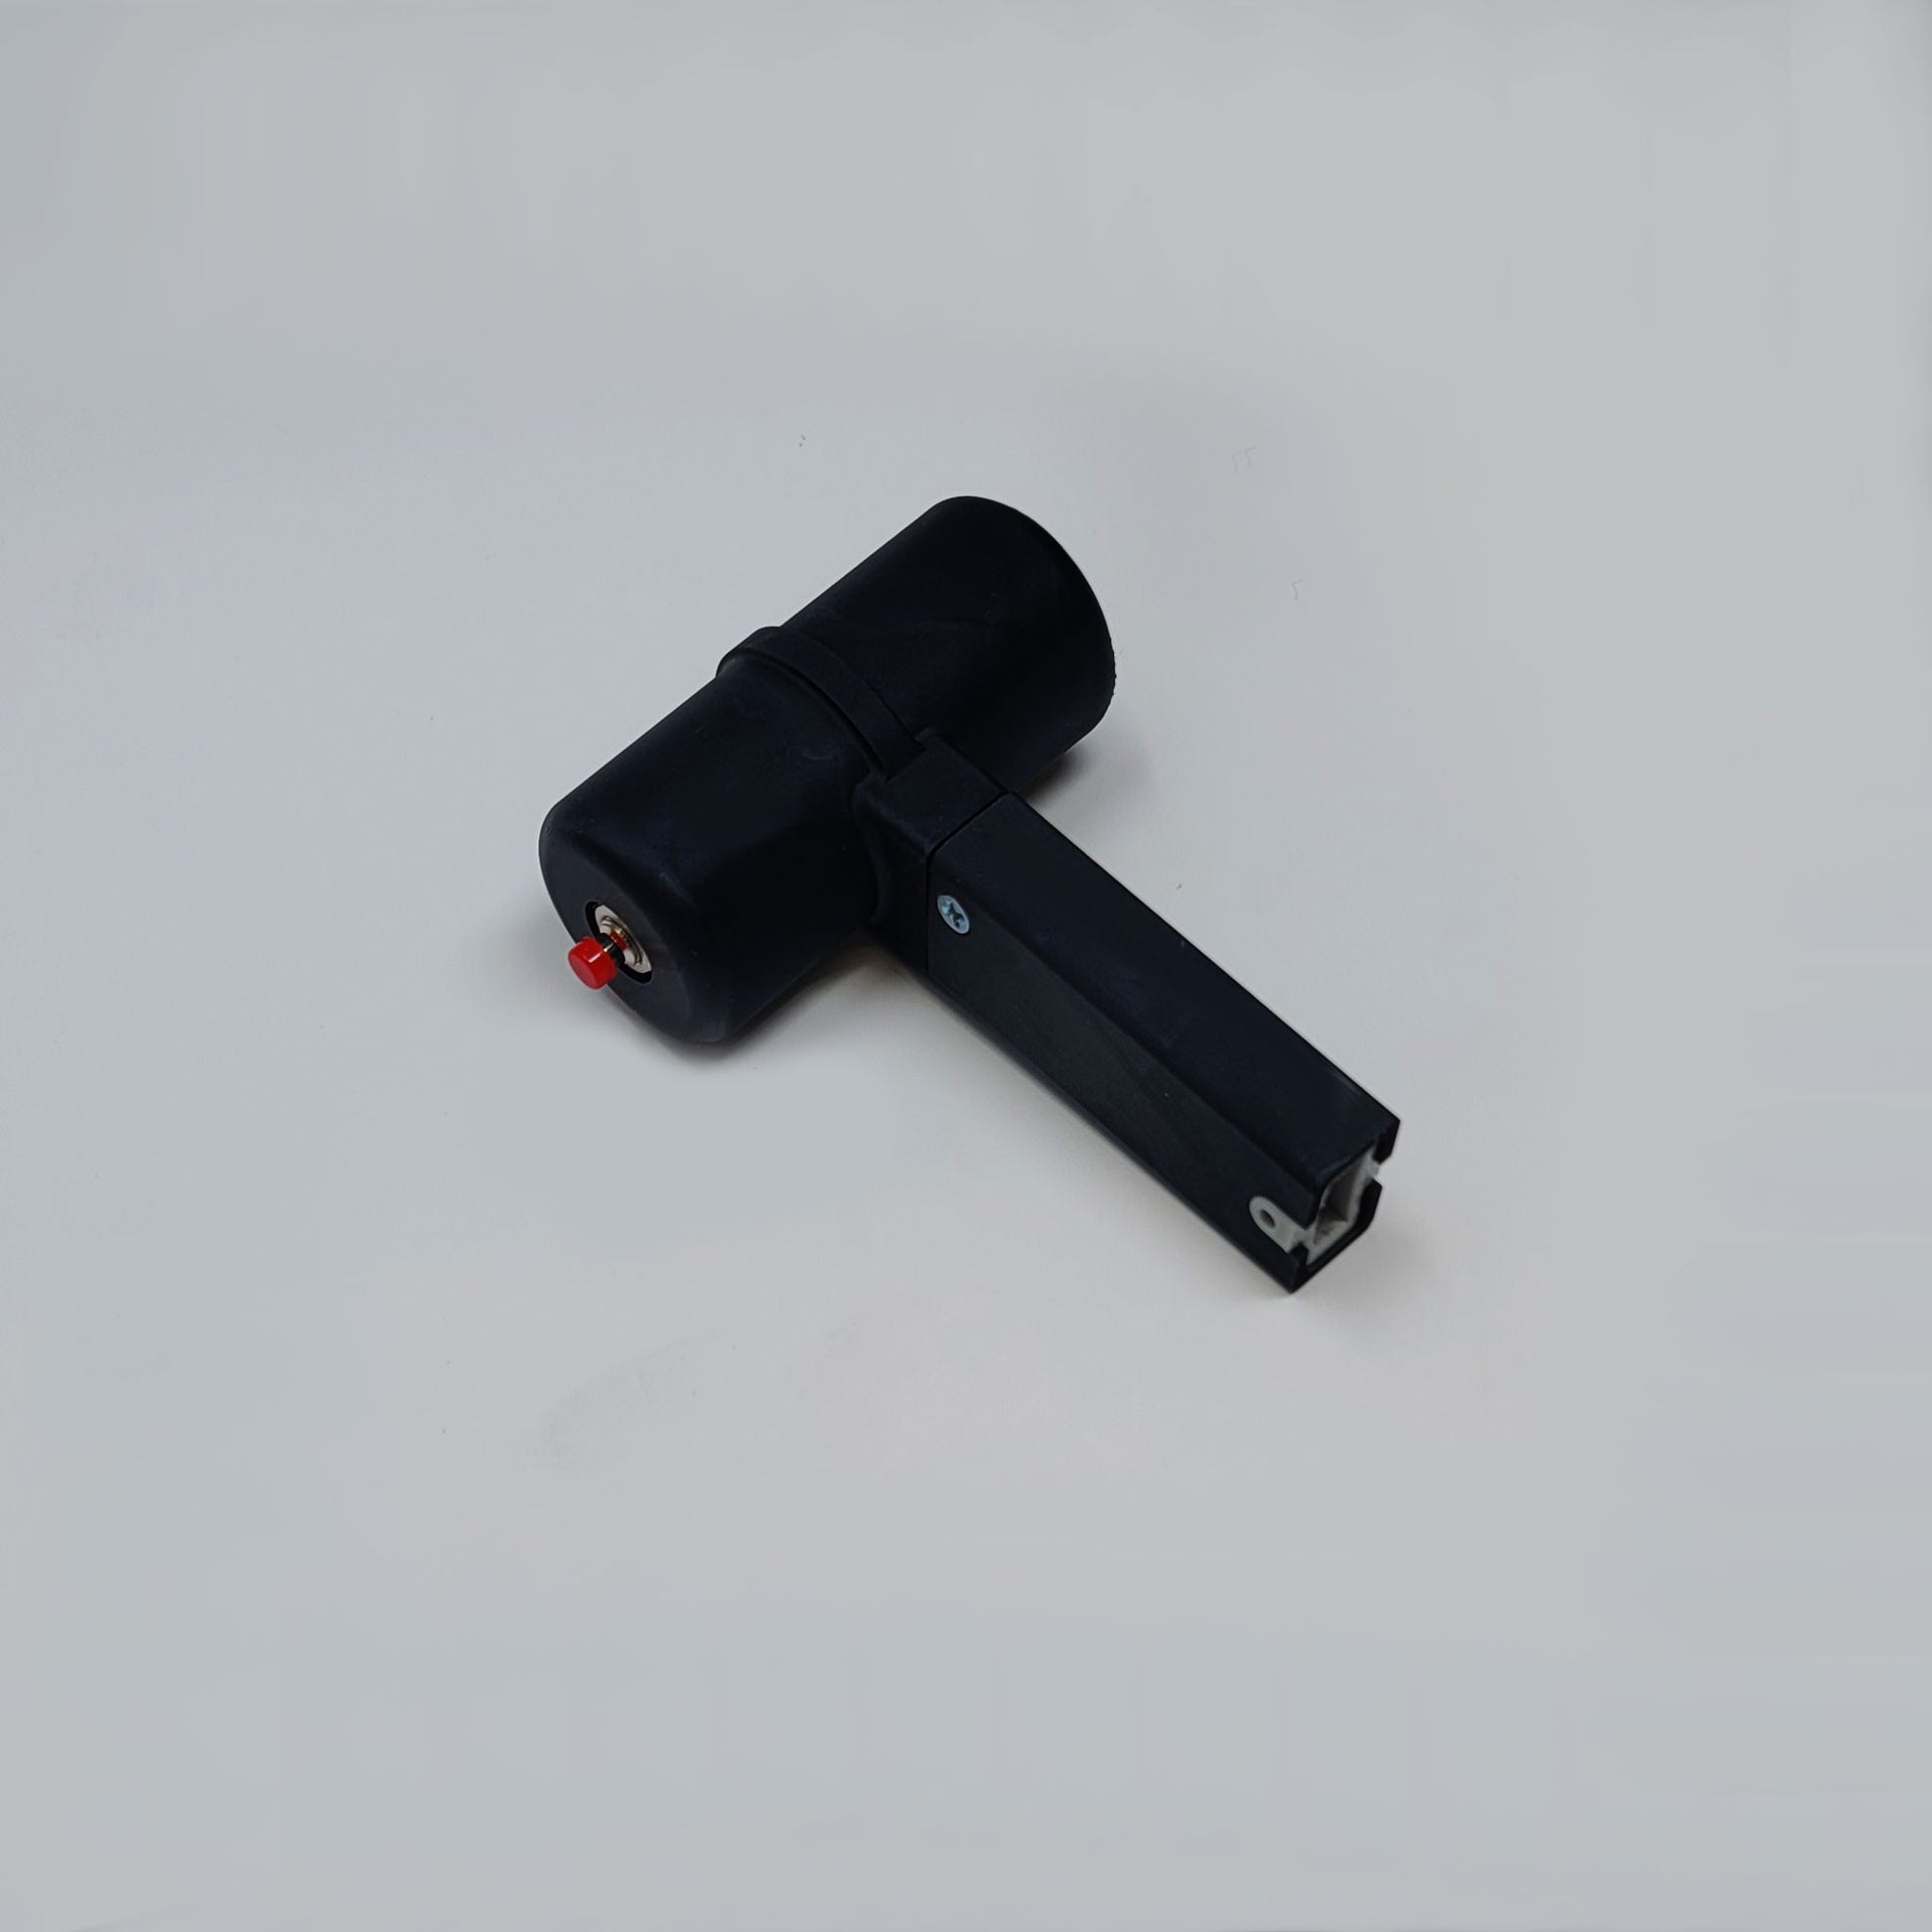 TBM 850 Throttle Lever for Honeycomb Bravo with Functional GA button